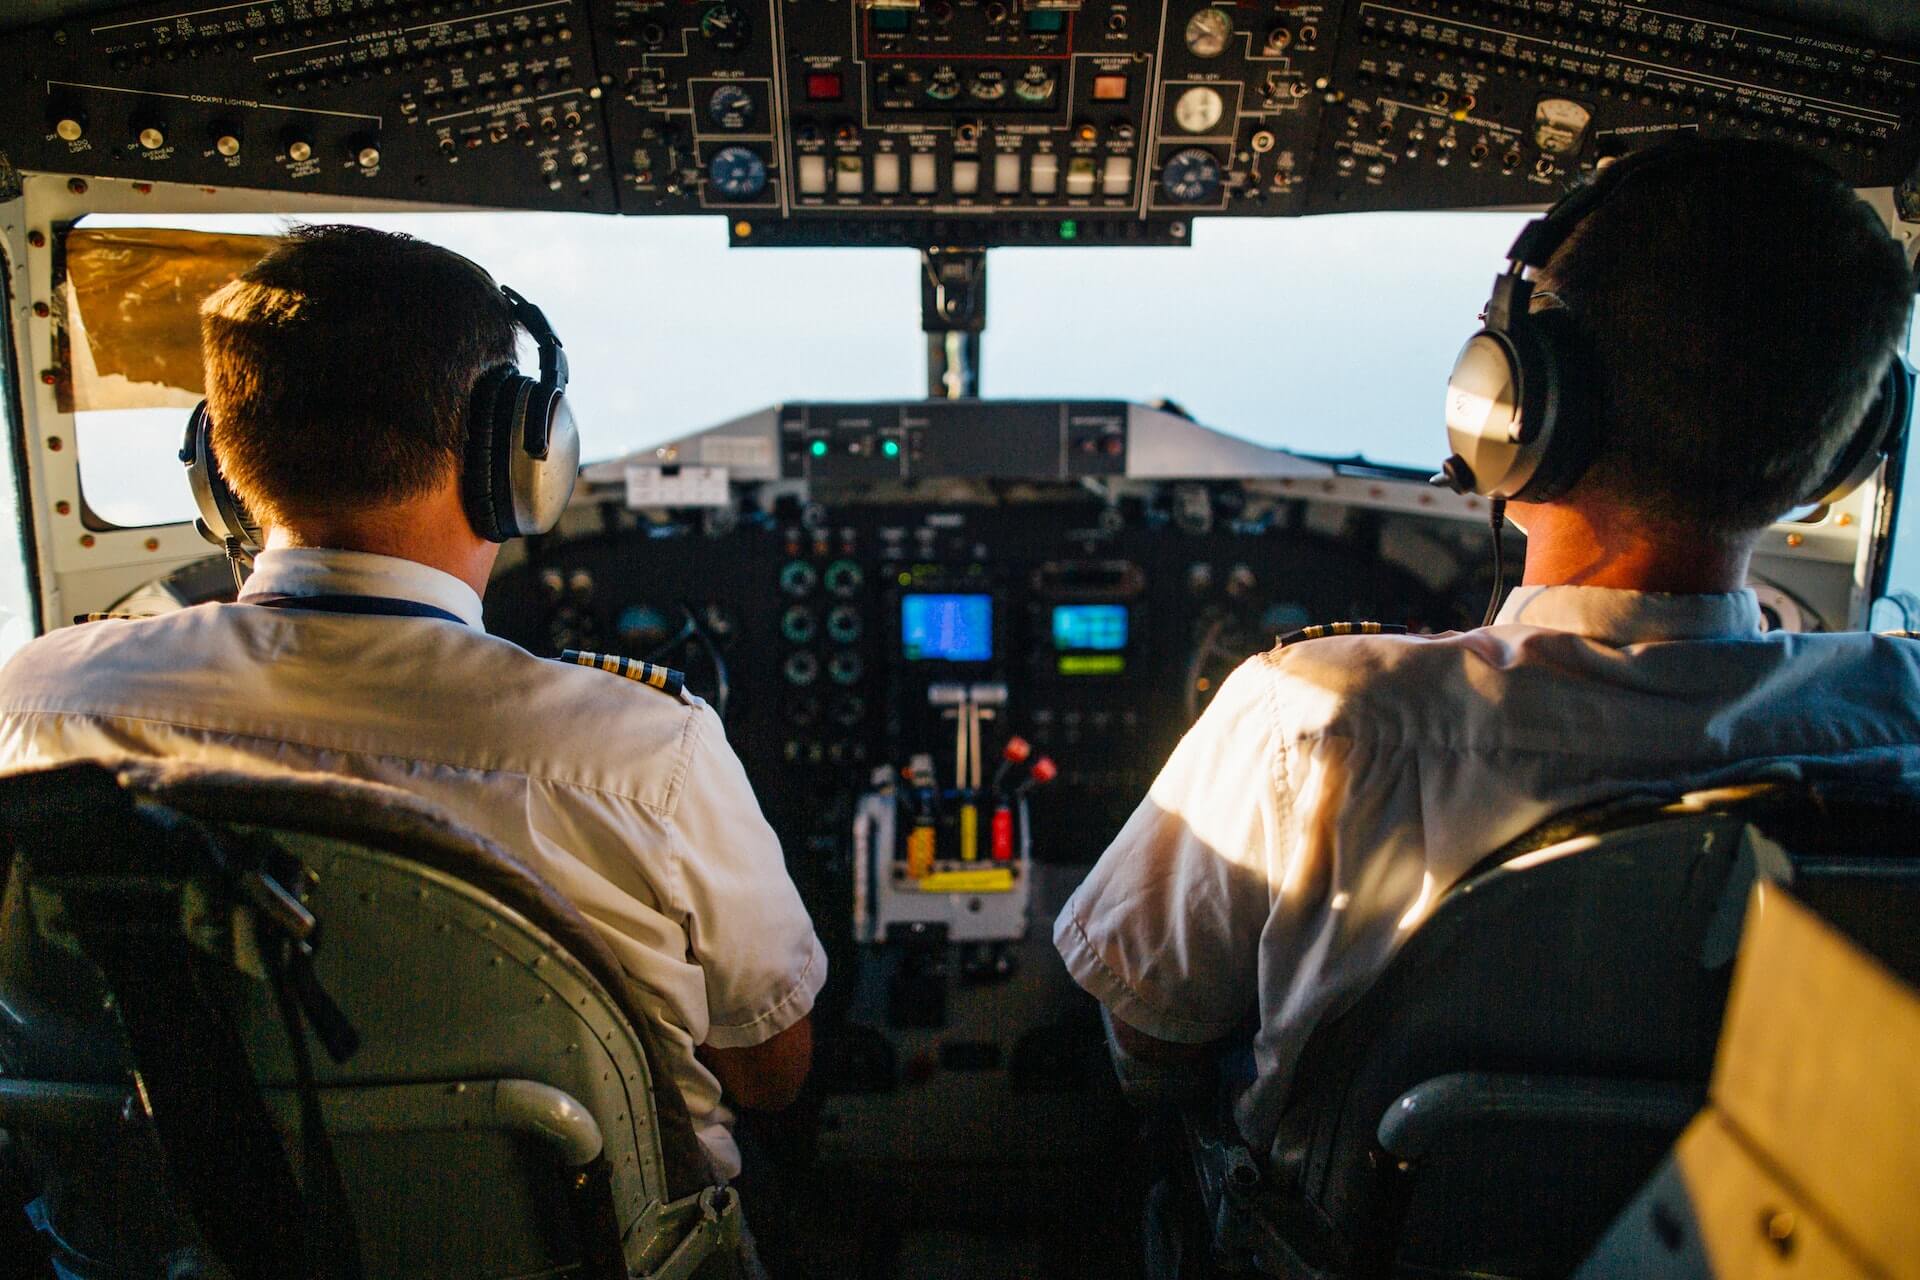 Two pilots flying commercial airliner